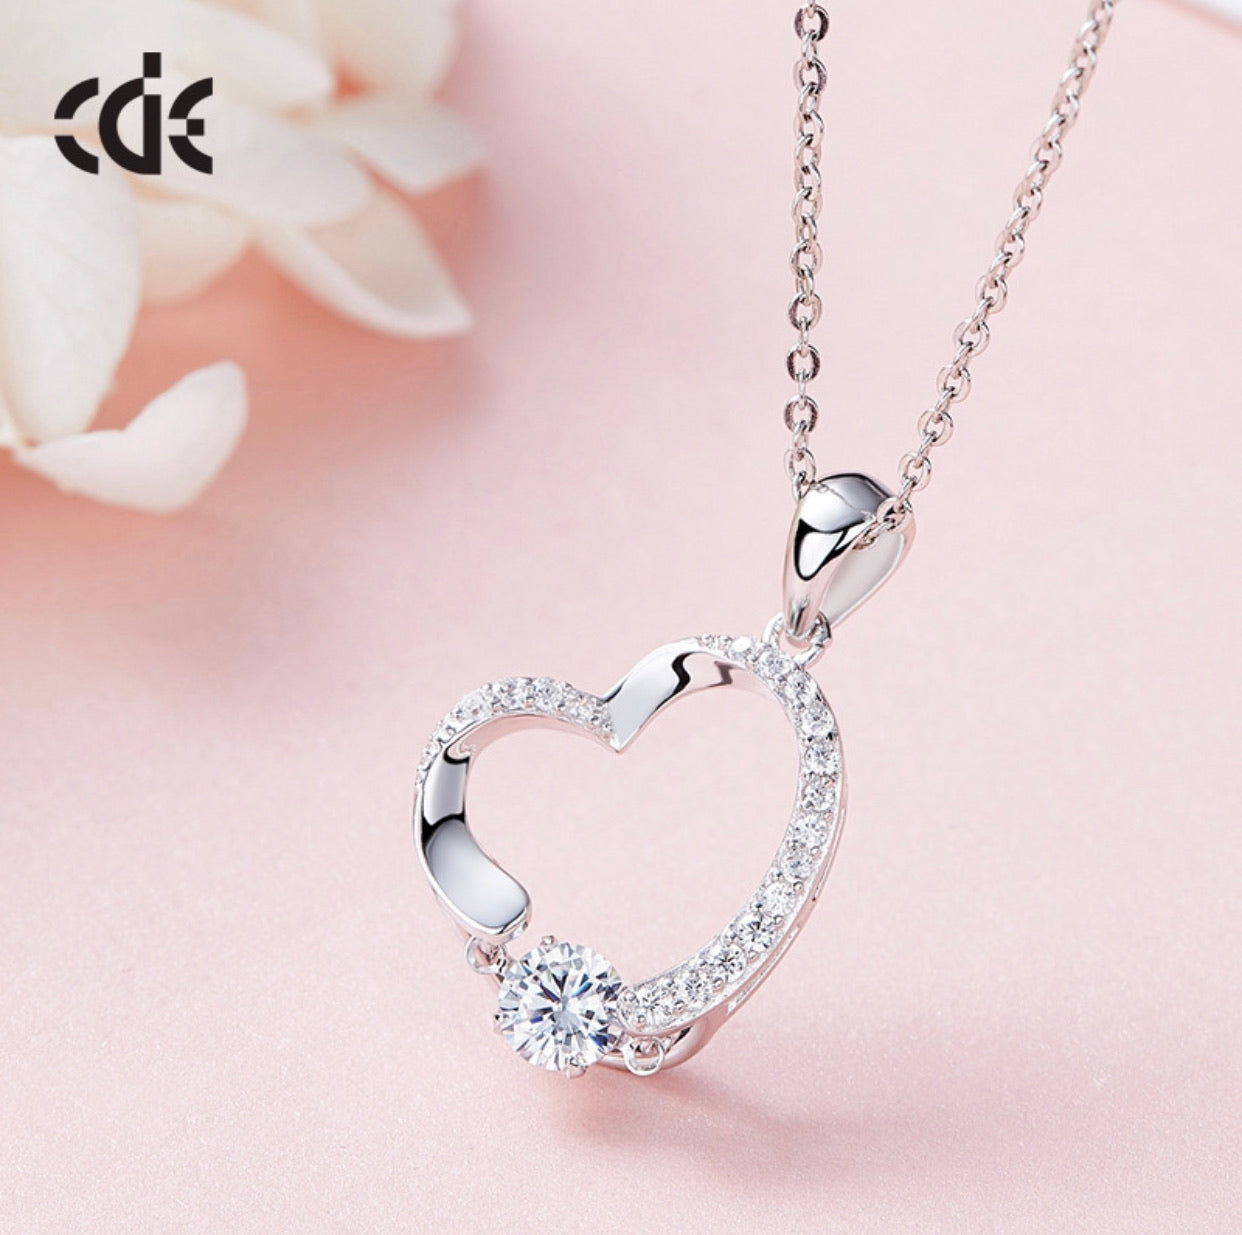 Sterling silver heart dancing crystal necklace - CDE Jewelry Egypt